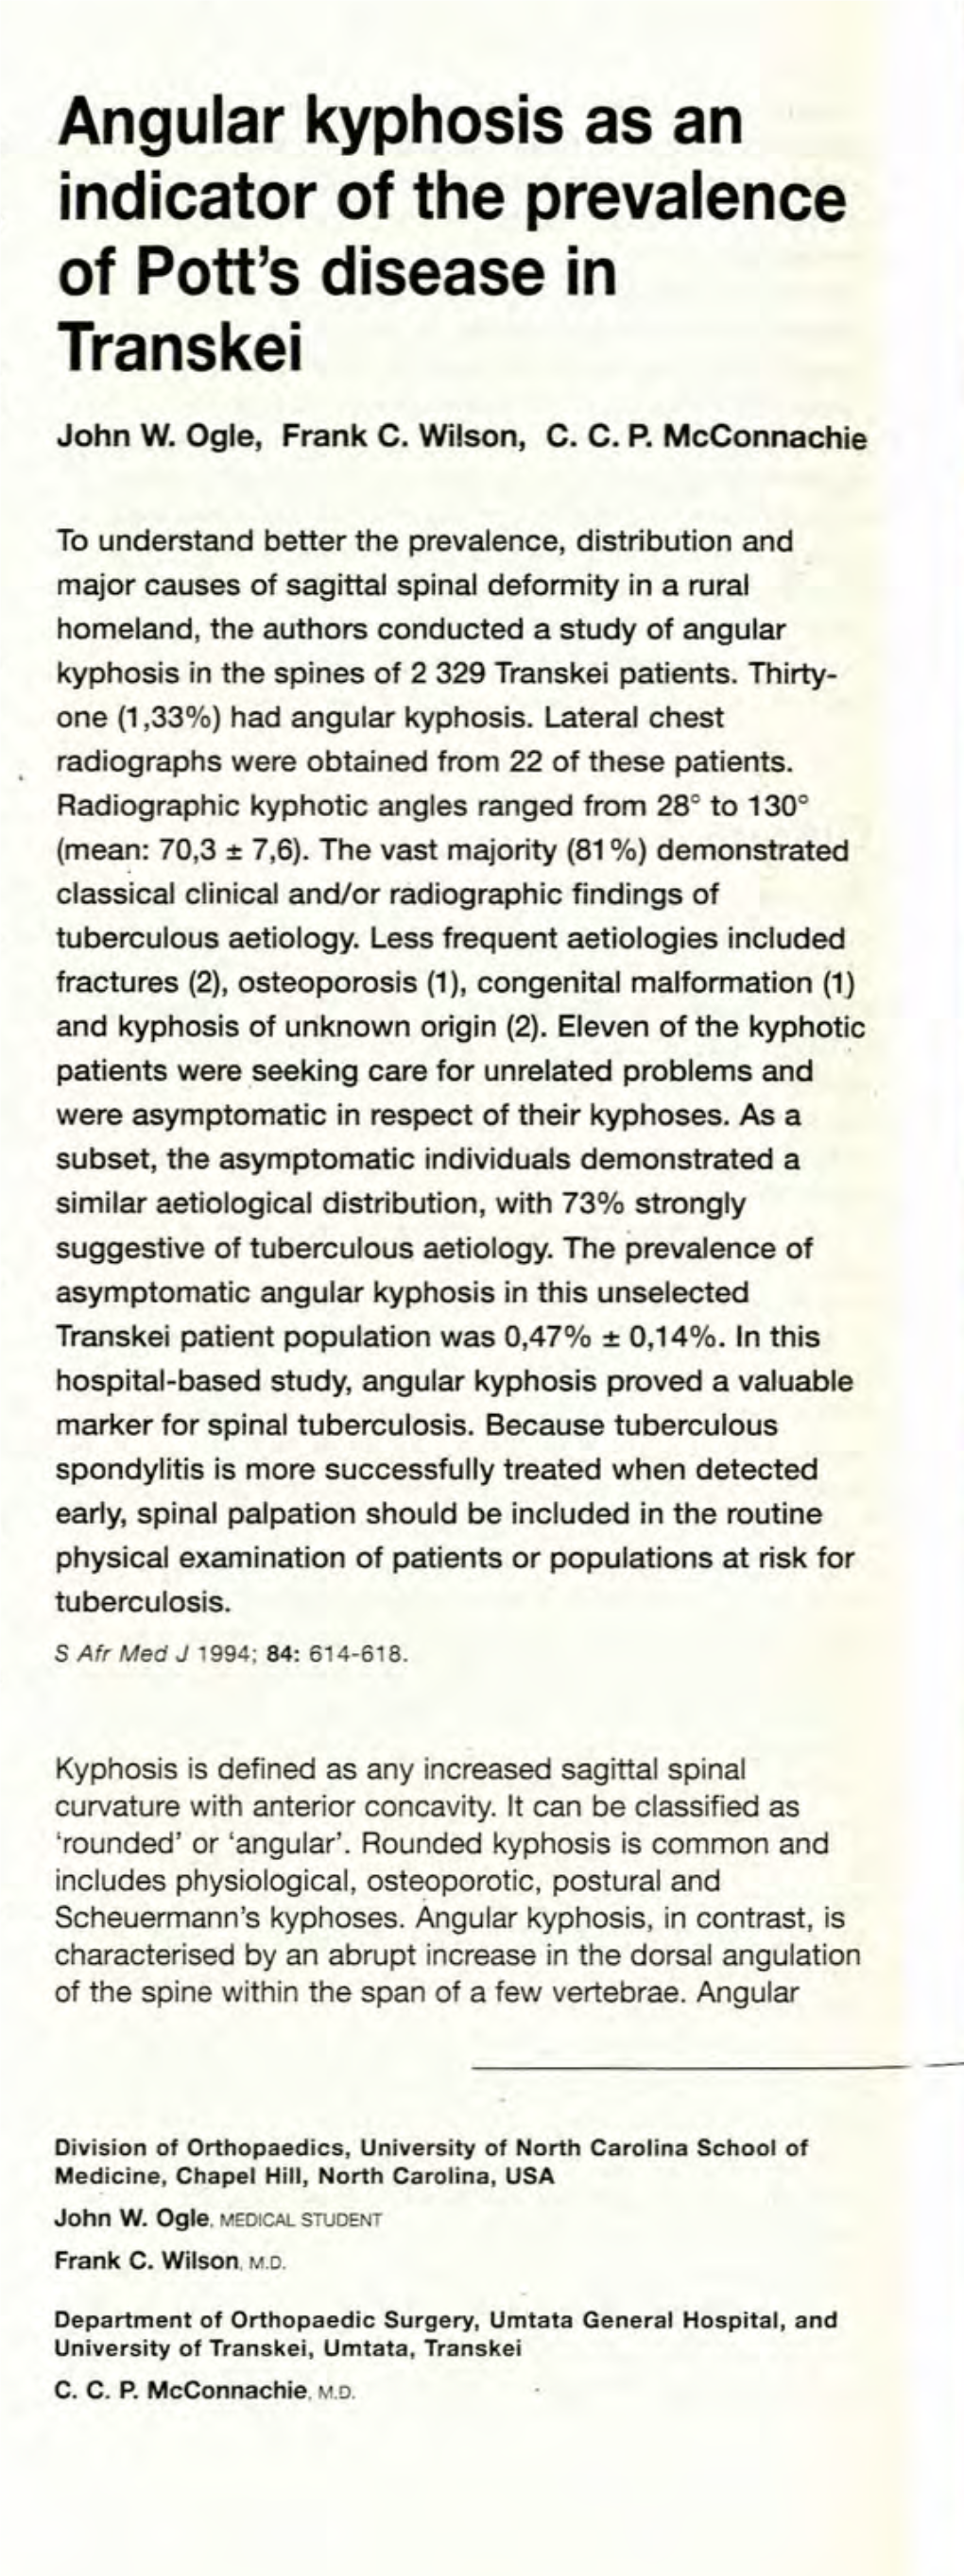 Angular Kyphosis As an Indicator of the Prevalence of Pott's Disease In